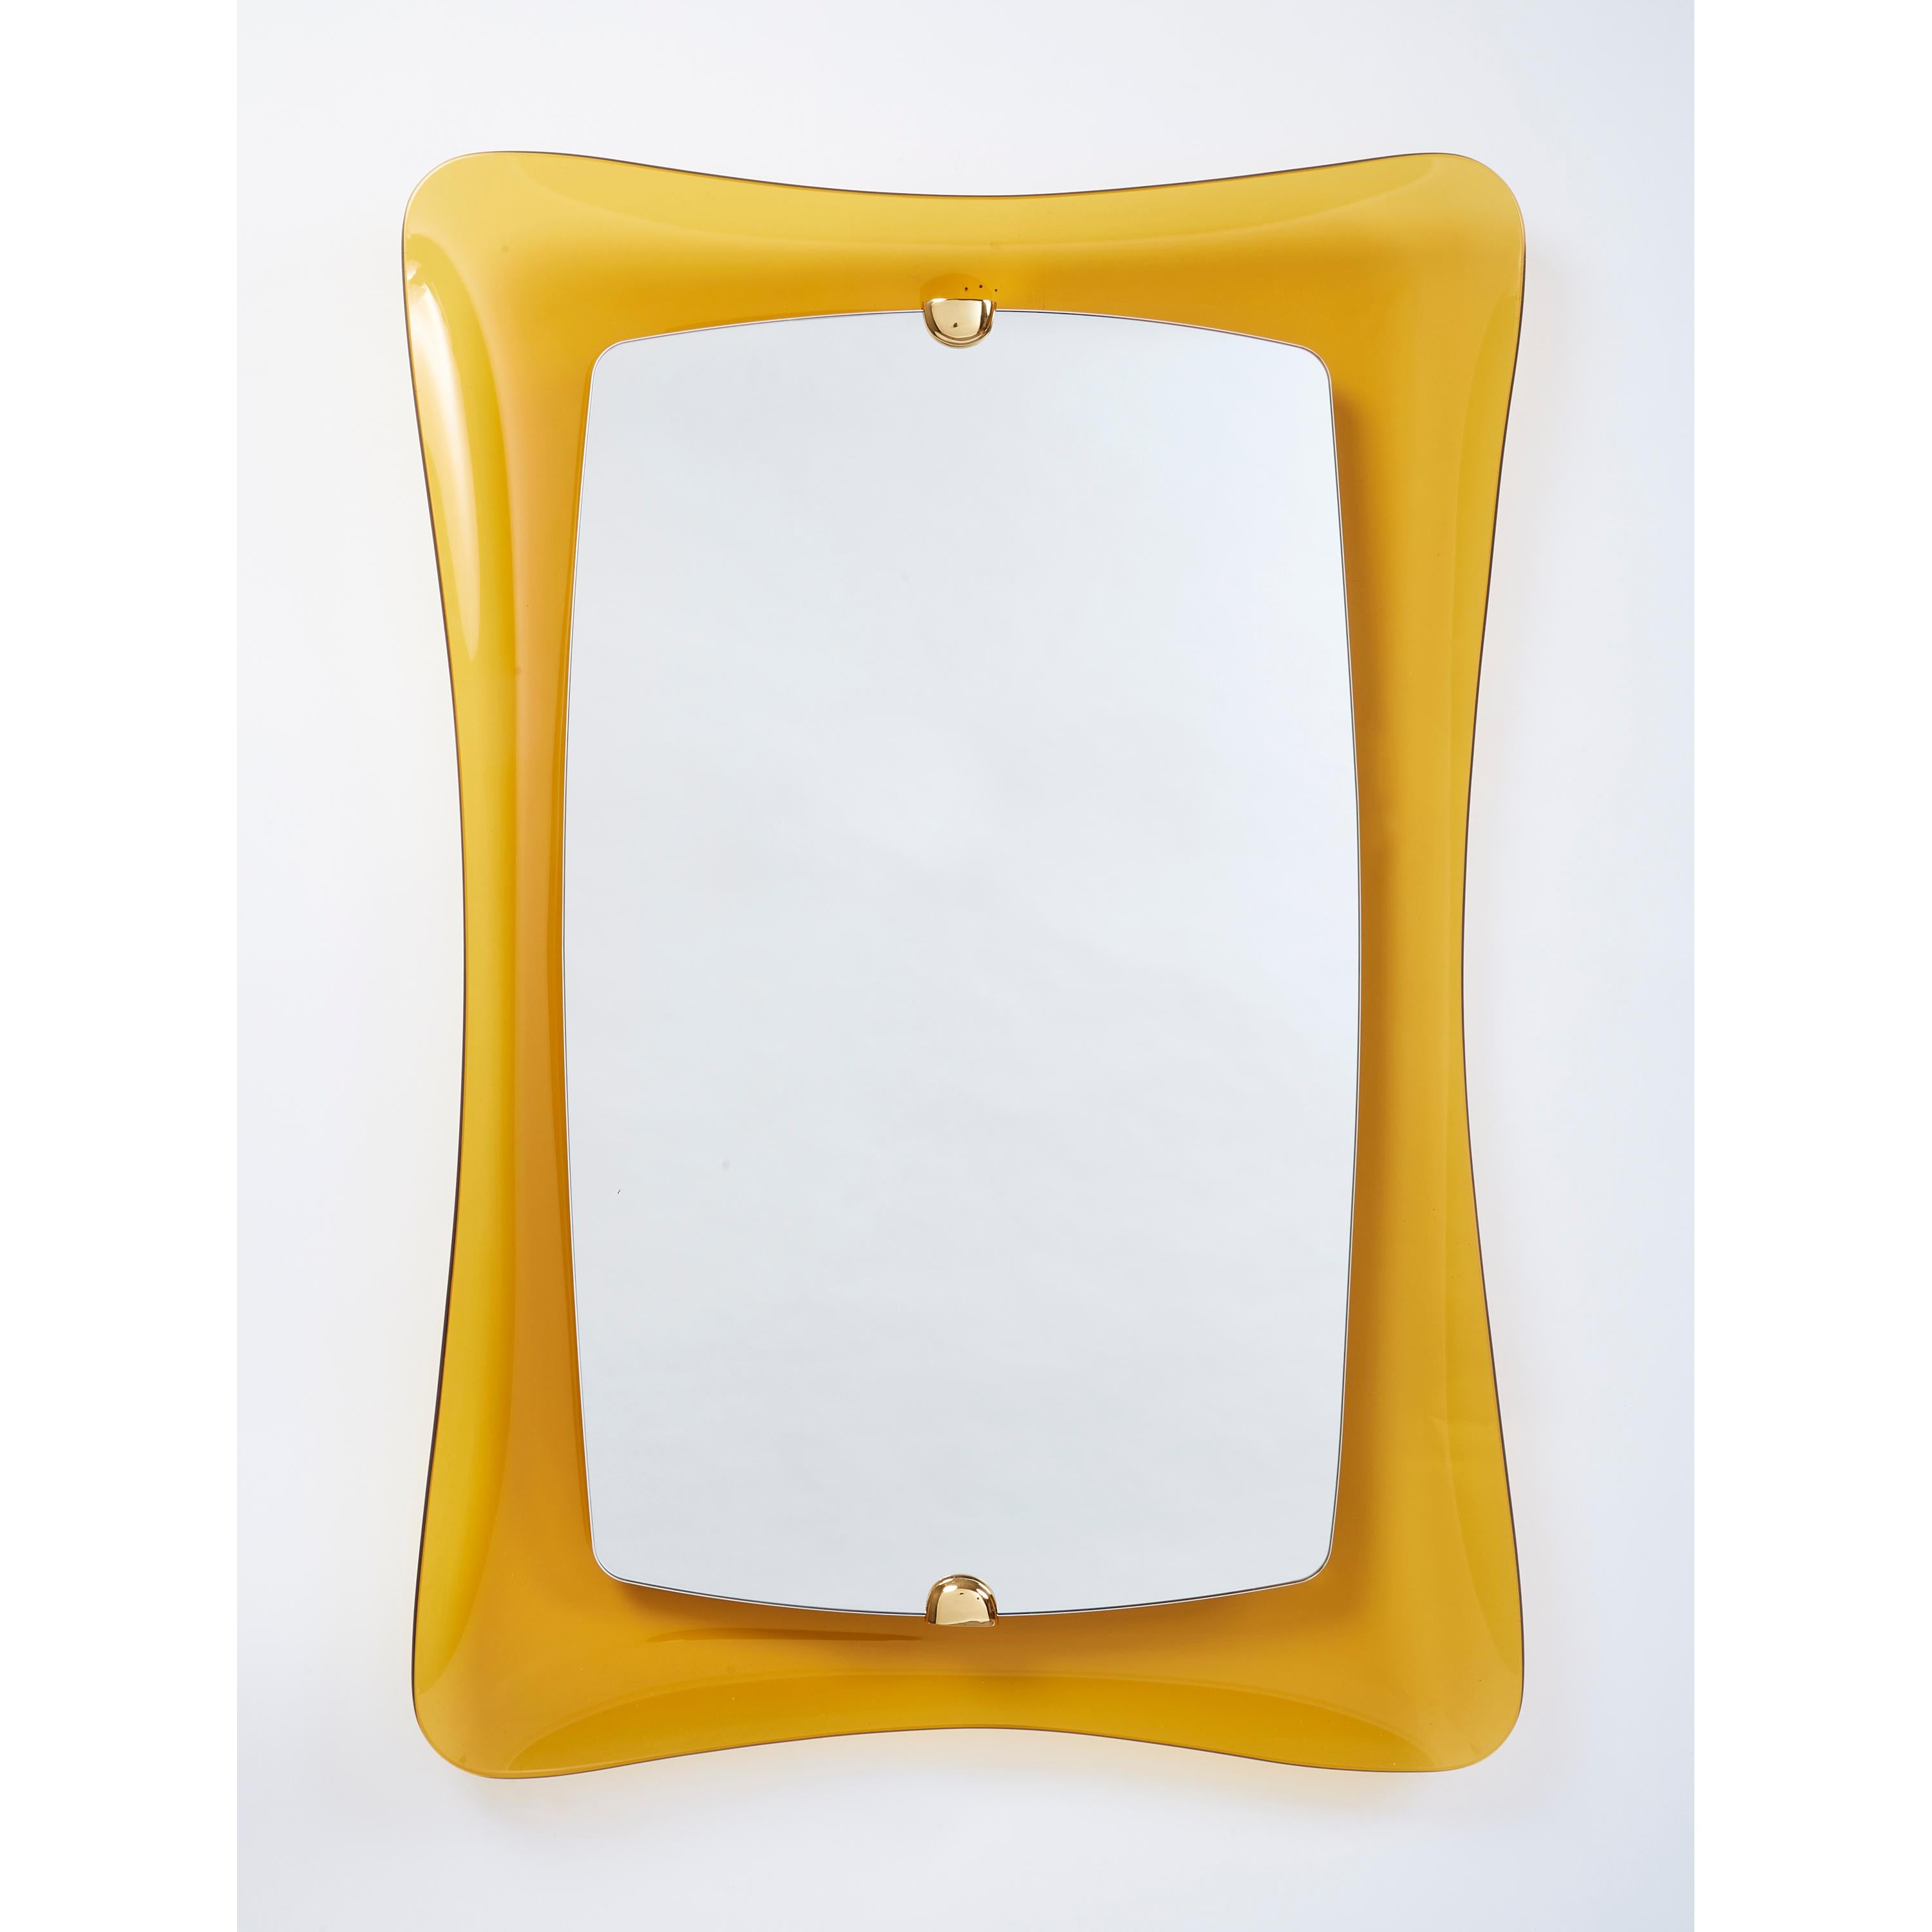 Italy, 1960s
A stunning glass mirror in sensuously rounded forms of yellow amber glass,
with rich bronze mounts.
39.5 H X 27 W X 3 D.